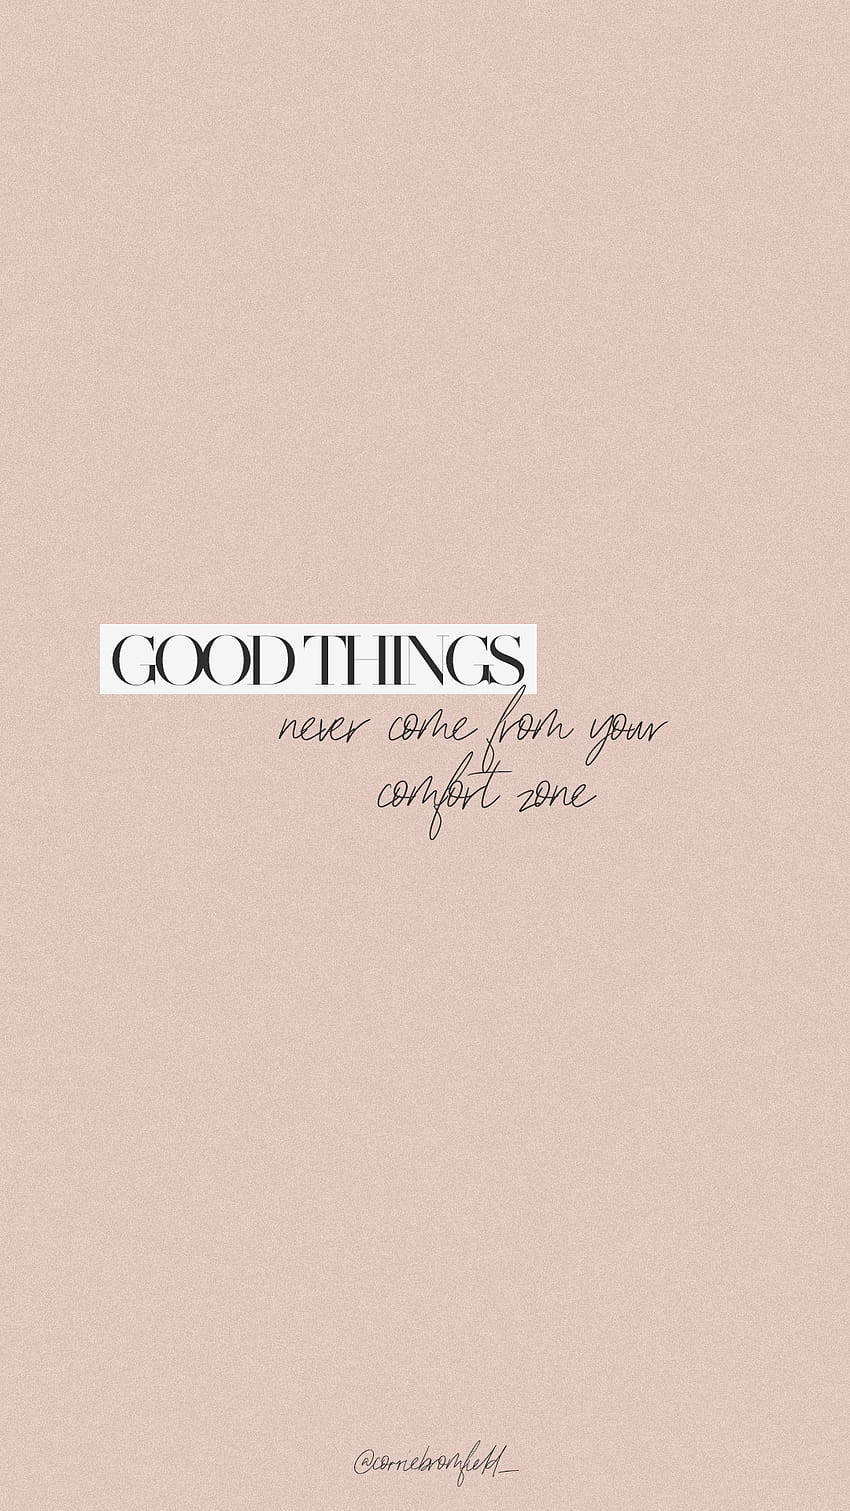 Quote aesthetic, Inspirational quotes, Quotes to live by, positive spring quotes HD phone wallpaper